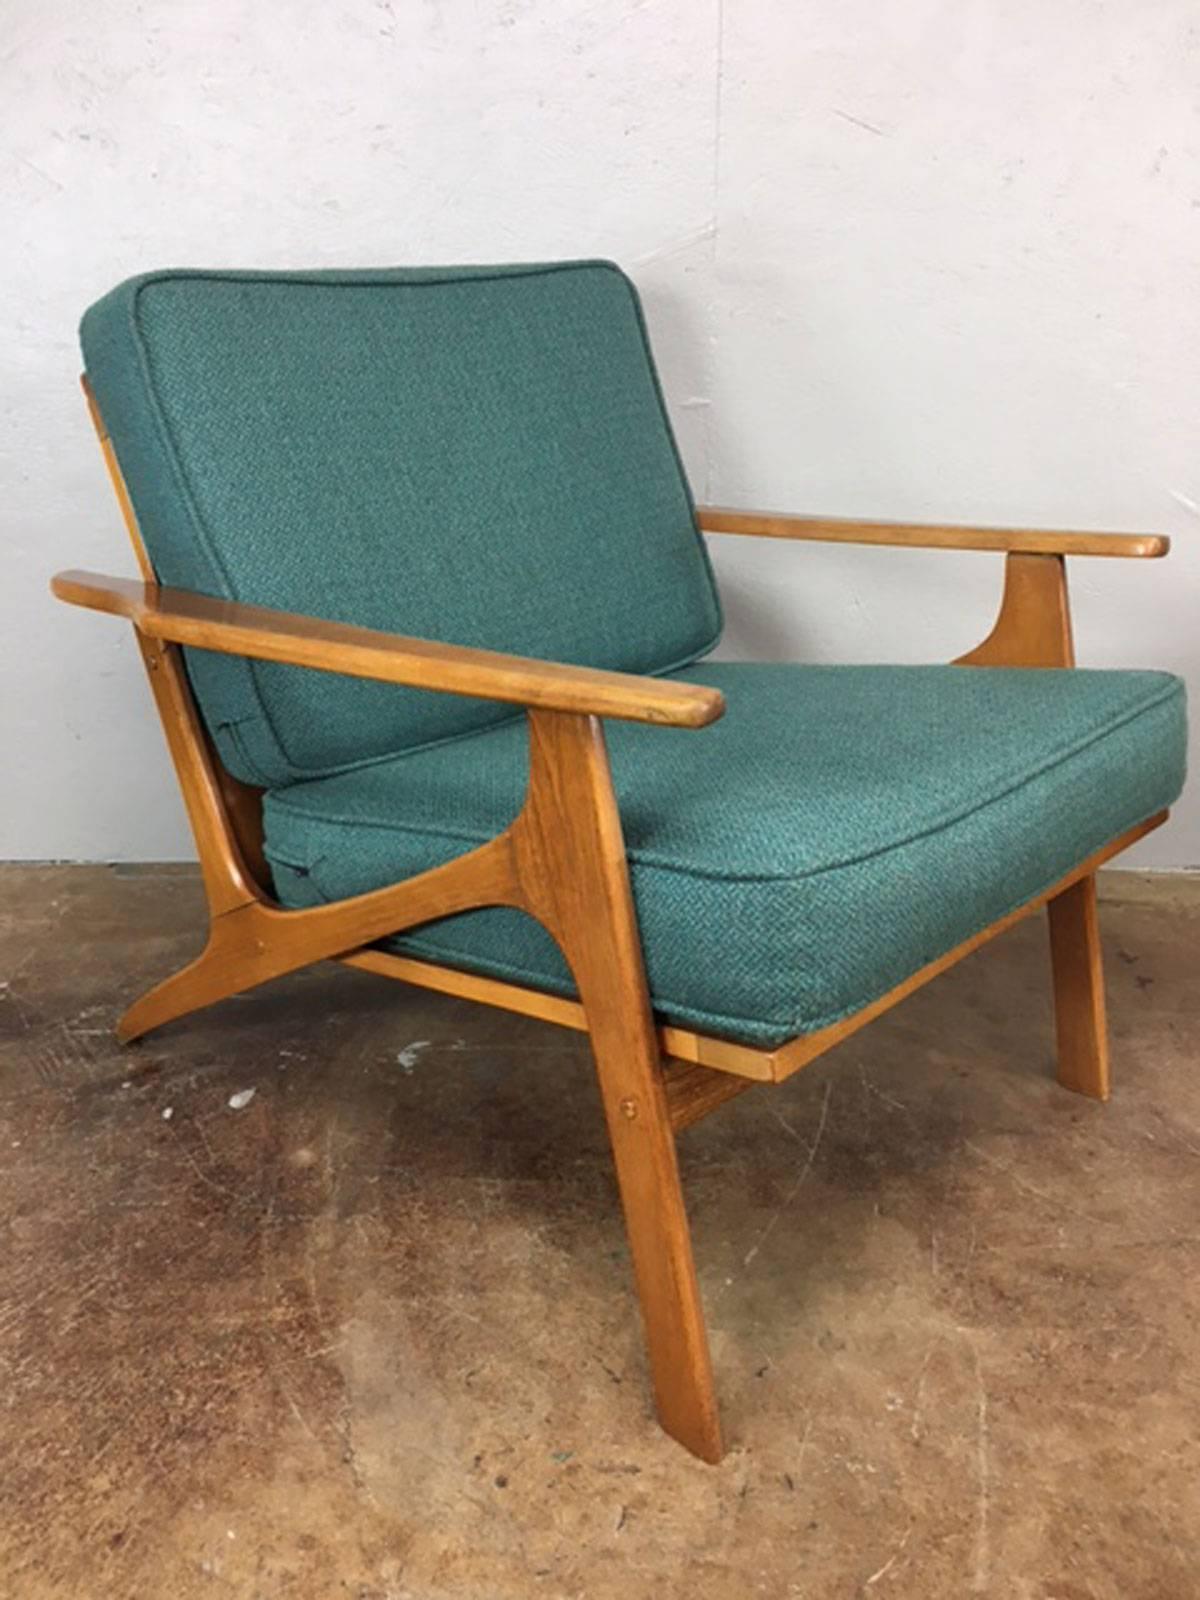 Pair of early Danish lounge chairs. Newer fabric. No rips, holes, tears or unusual wear. Overall good condition. Wood is in original condition.